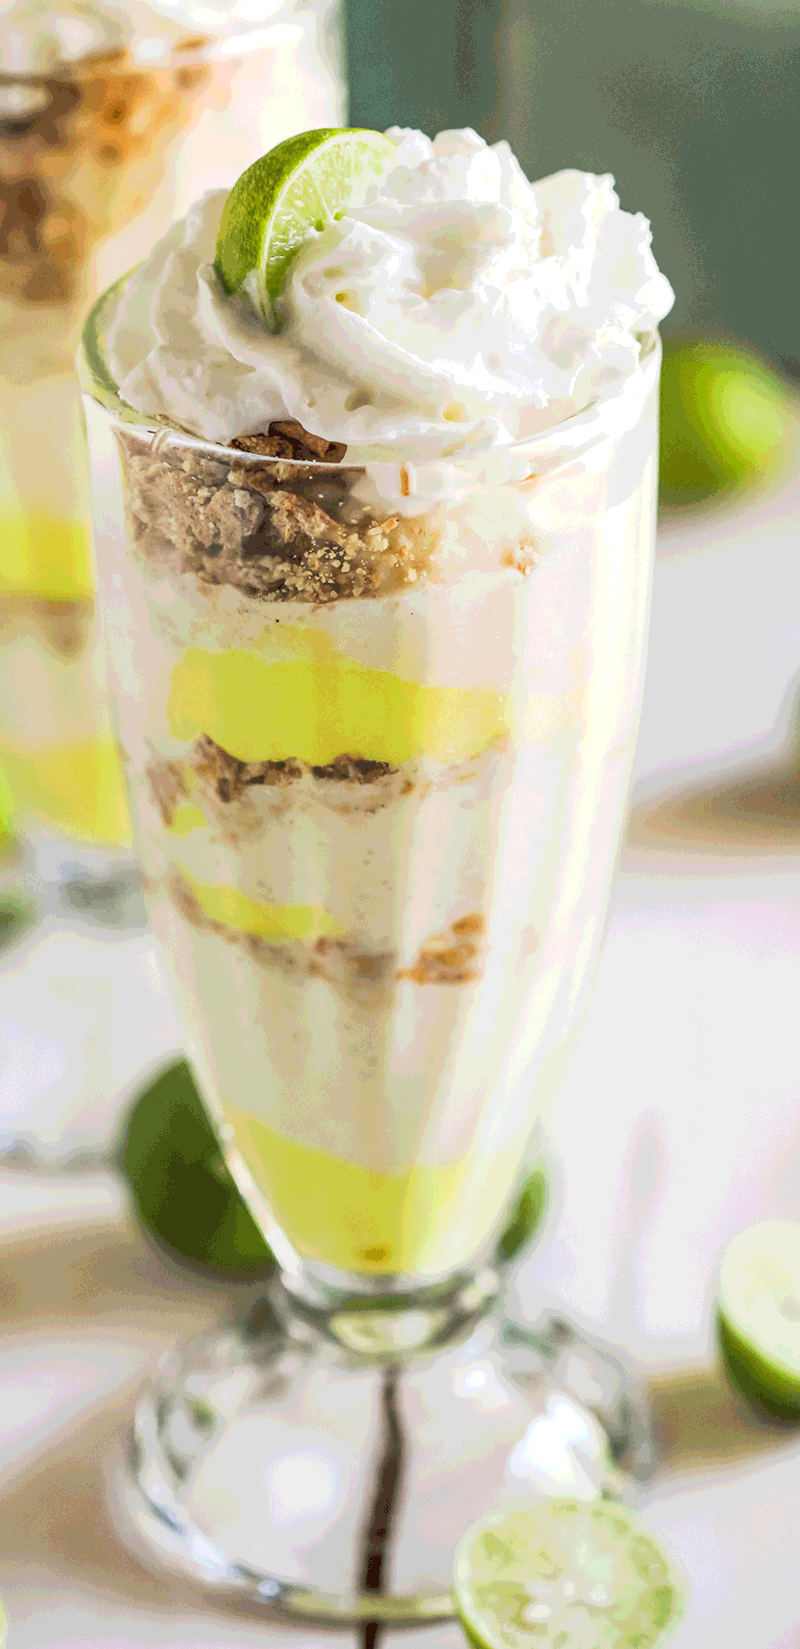 Can you believe these Healthy Key Lime Pie Sundaes are made completely from scratch? Oh yes. From the Vanilla Bean Frozen Yogurt to the Key Lime Curd to the Graham Crackers, it's all homemade! Low sugar, high protein, and gluten free too! Healthy Dessert Recipes with sugar free, low calorie, low fat, low carb, dairy free, vegan, and raw options at the Desserts With Benefits Blog